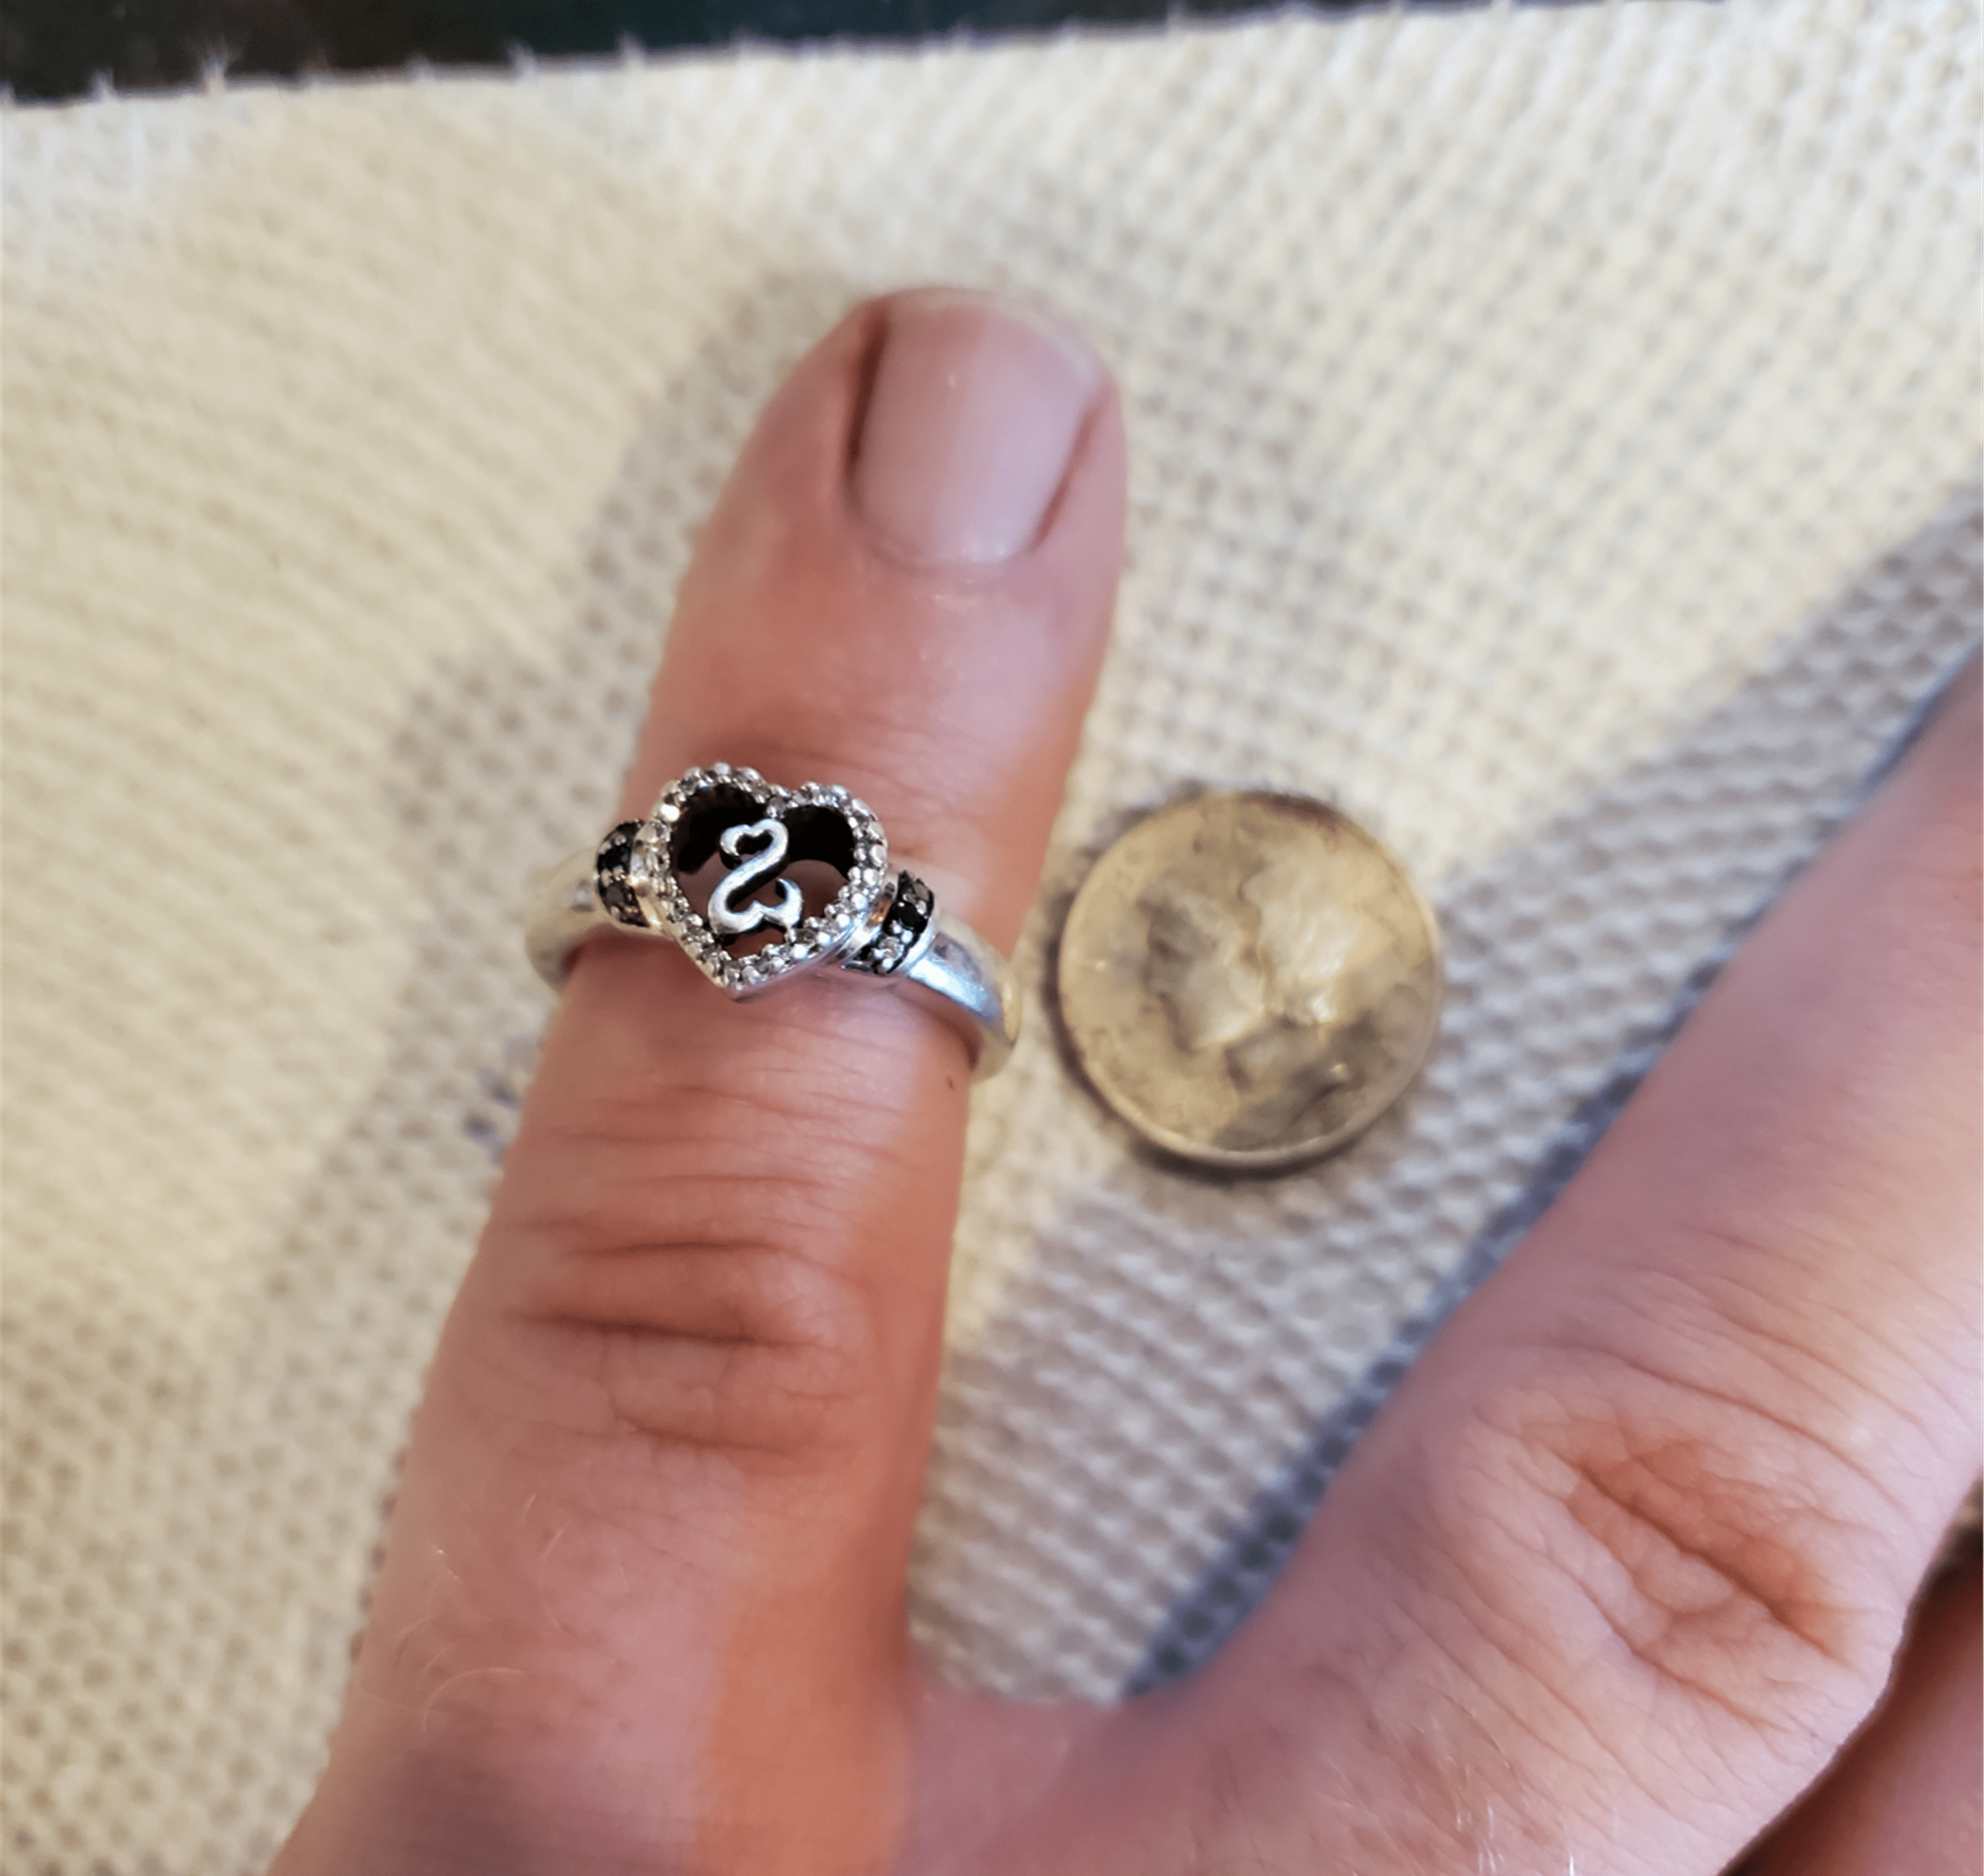 silver ring and mercury dime found on same day metal detecting in kansas city with equinox 800 metal detector